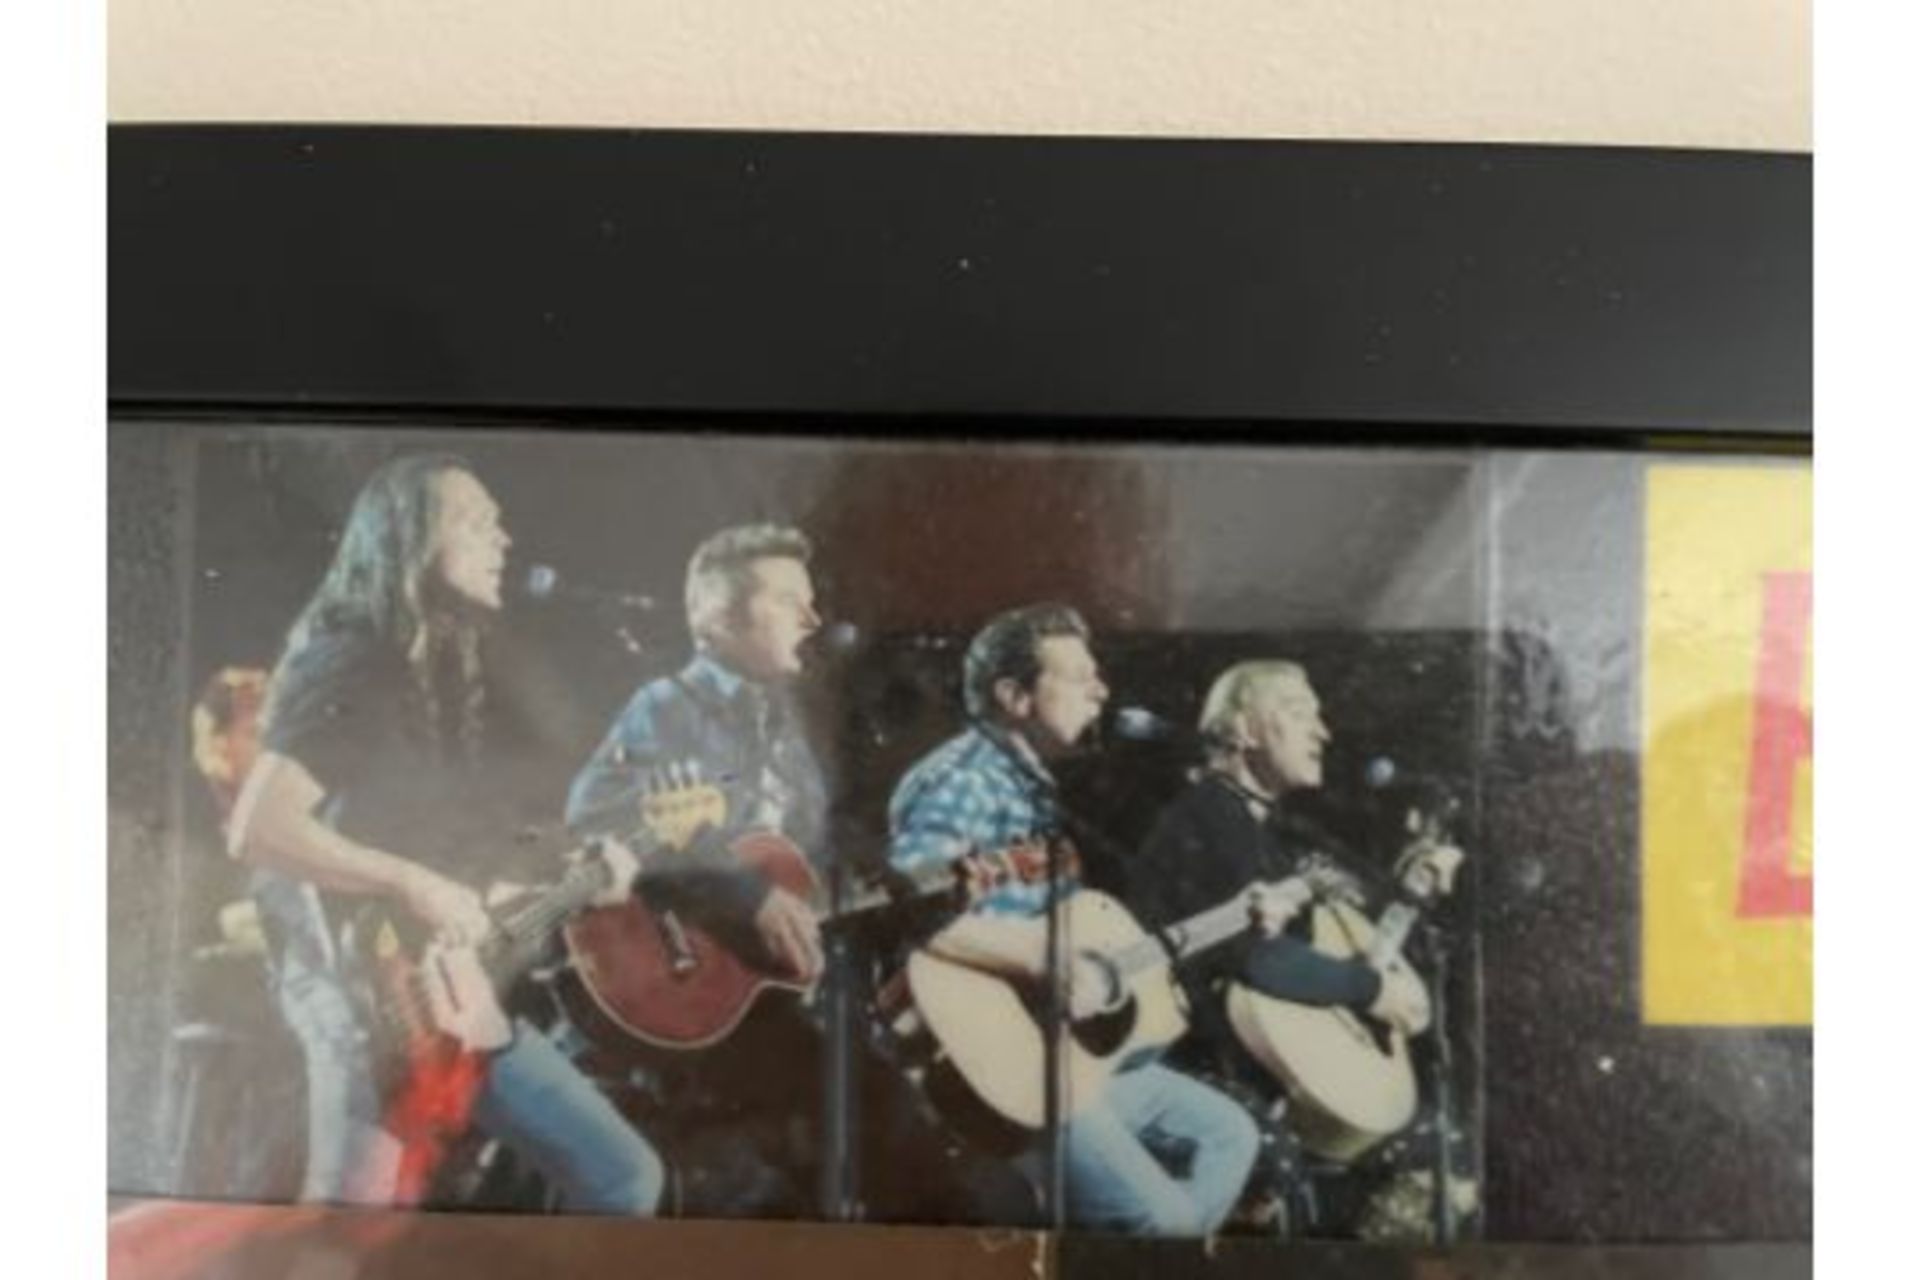 Very Rare Large Signed Framed Phots of the Eagles in Concert - Image 5 of 10